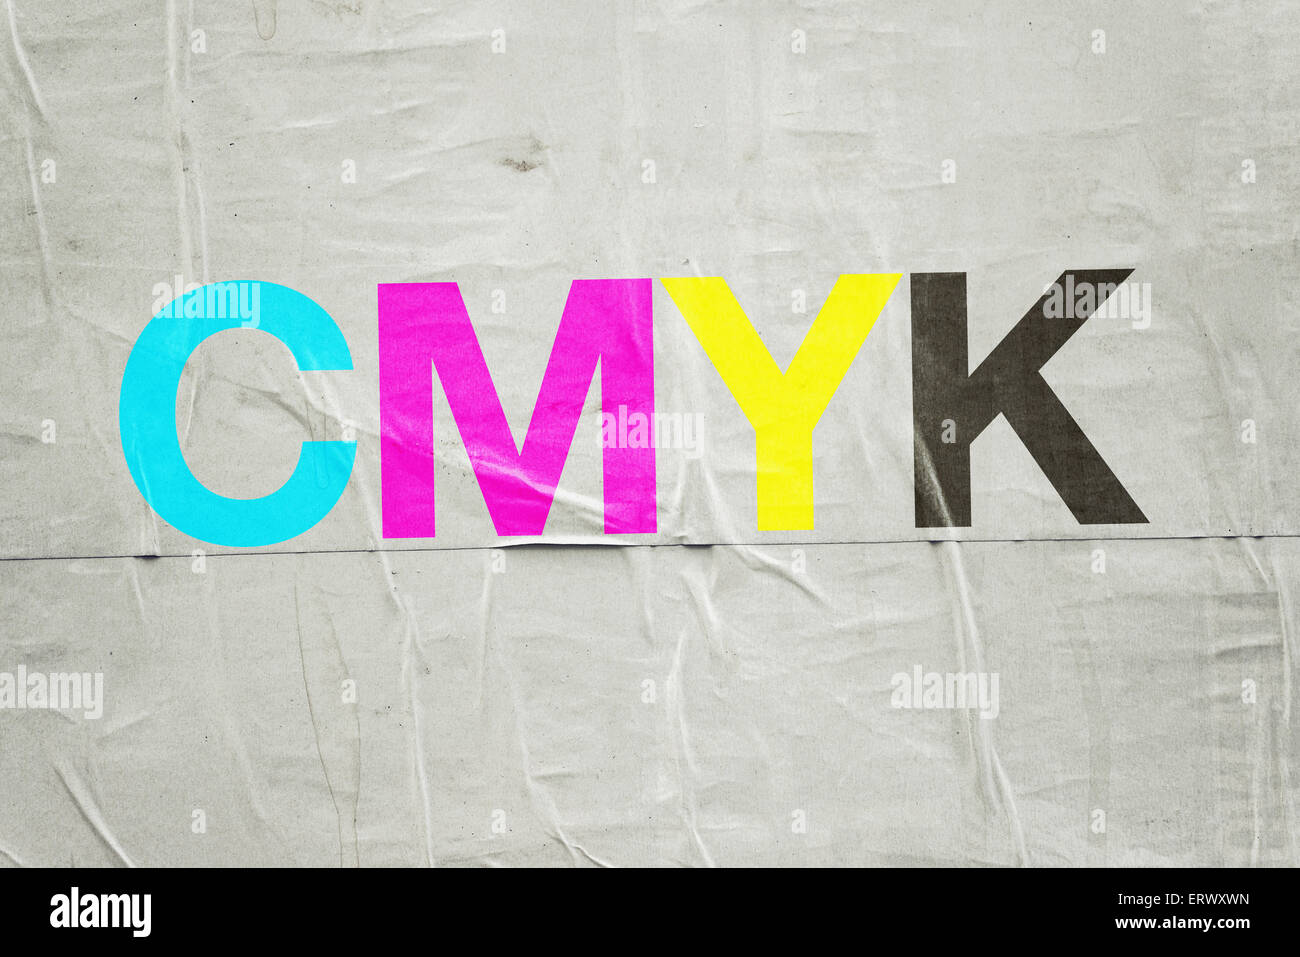 CMYK Digital Printing Technology with Cyan, Magenta, Yellow and Black Letters on Glued Poster Paper Stock Photo